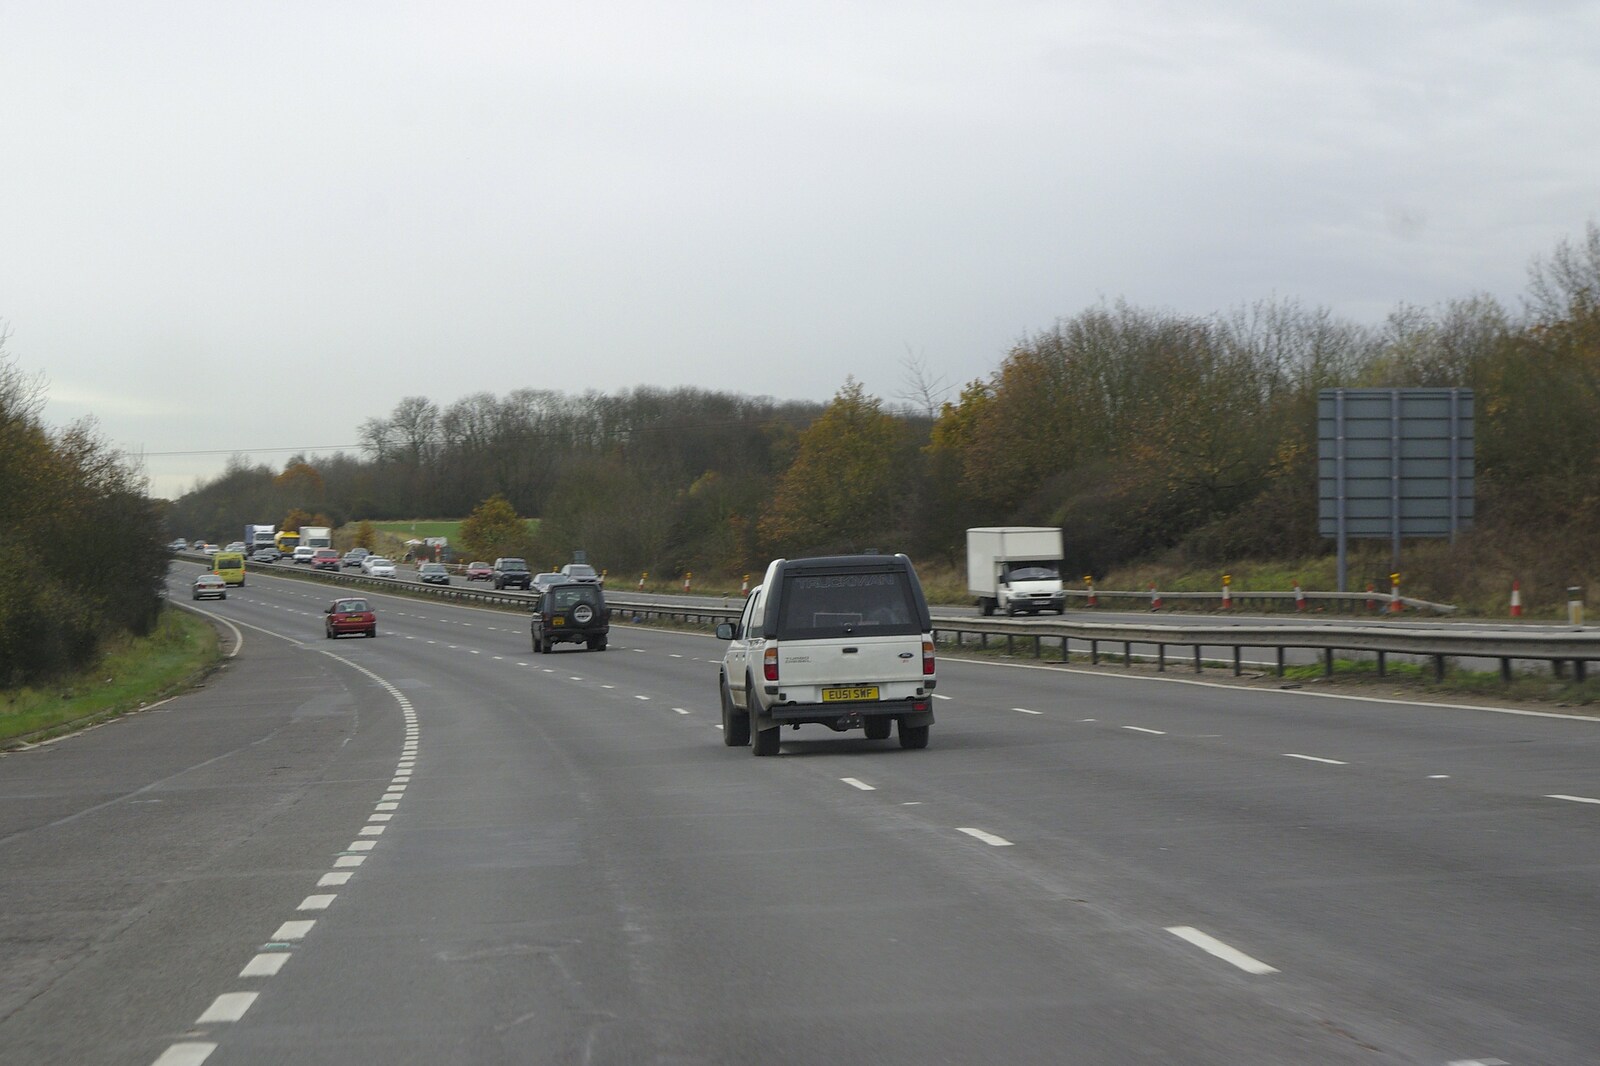 The BBs On Tour, Gatwick Copthorne, West Sussex - 24th November 2007: On the M25